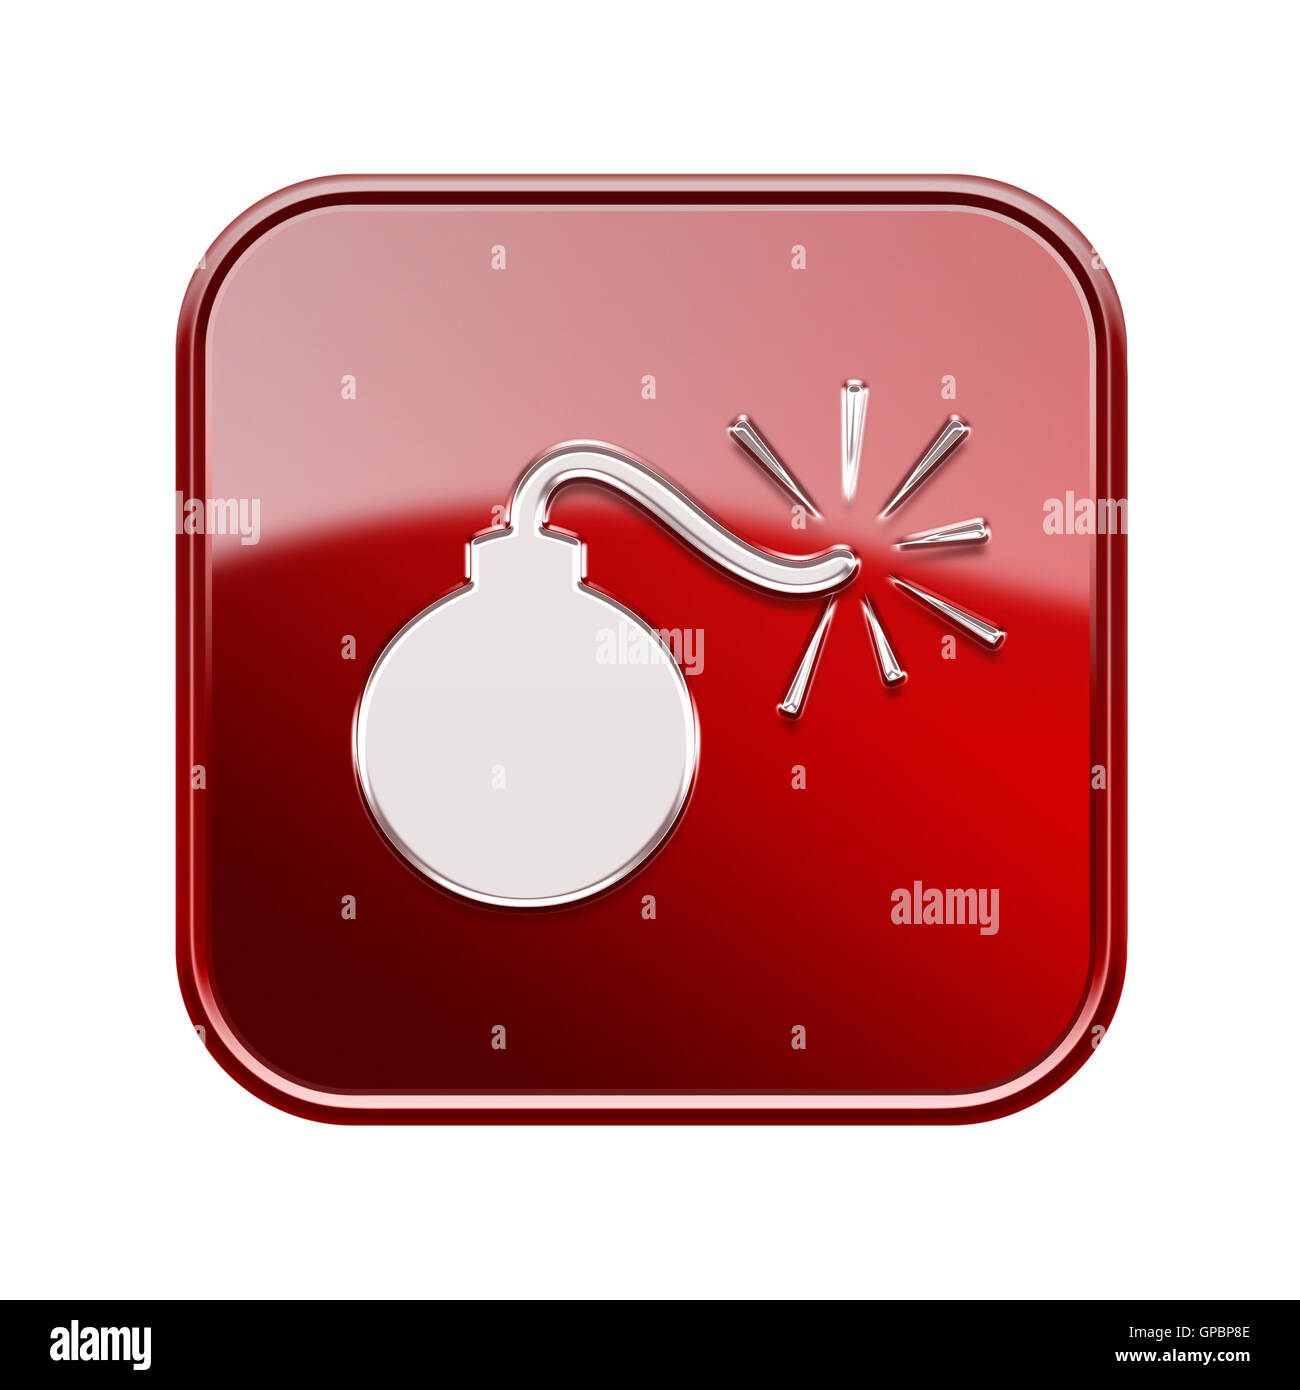 bomb icon glossy red, isolated on white background Stock Photo